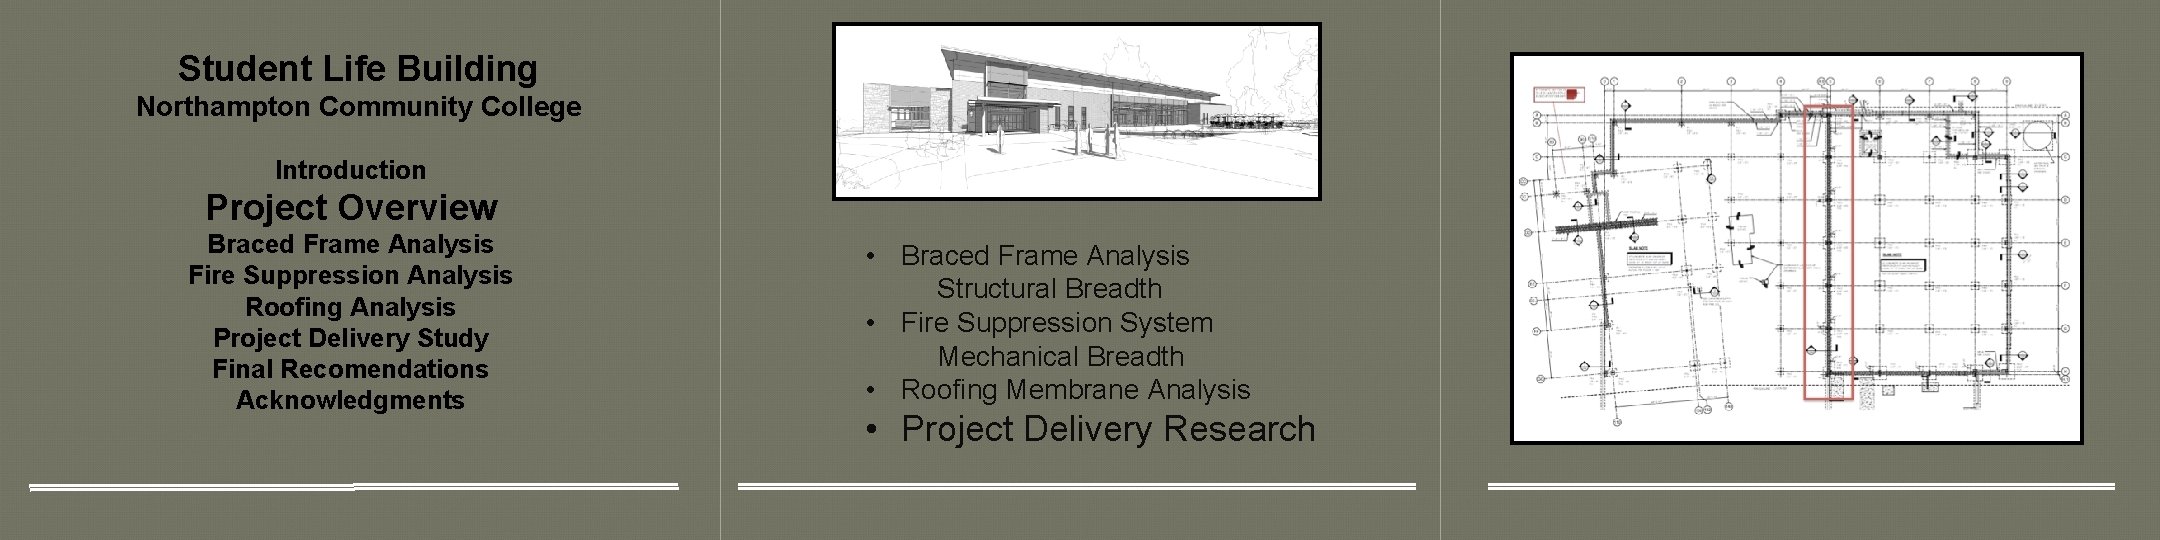 Student Life Building Northampton Community College Introduction Project Overview Braced Frame Analysis Fire Suppression